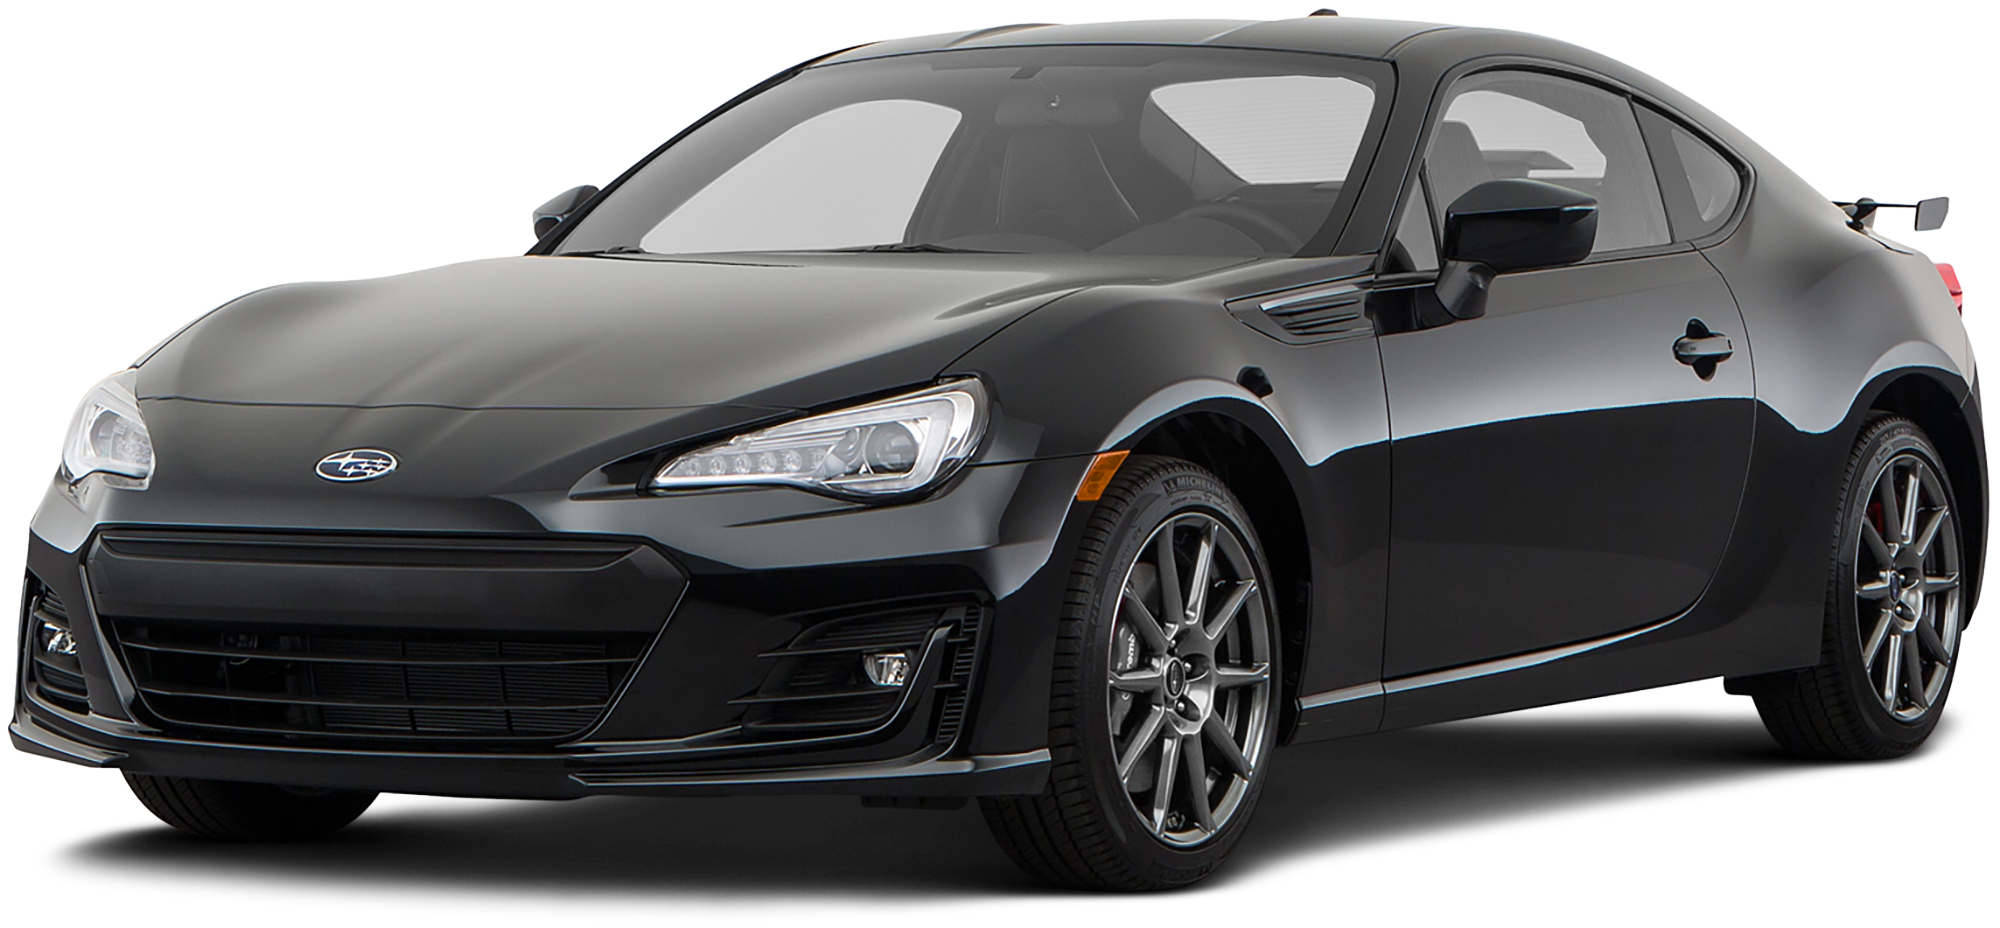 2020 Subaru BRZ Incentives, Specials & Offers in Greensburg PA